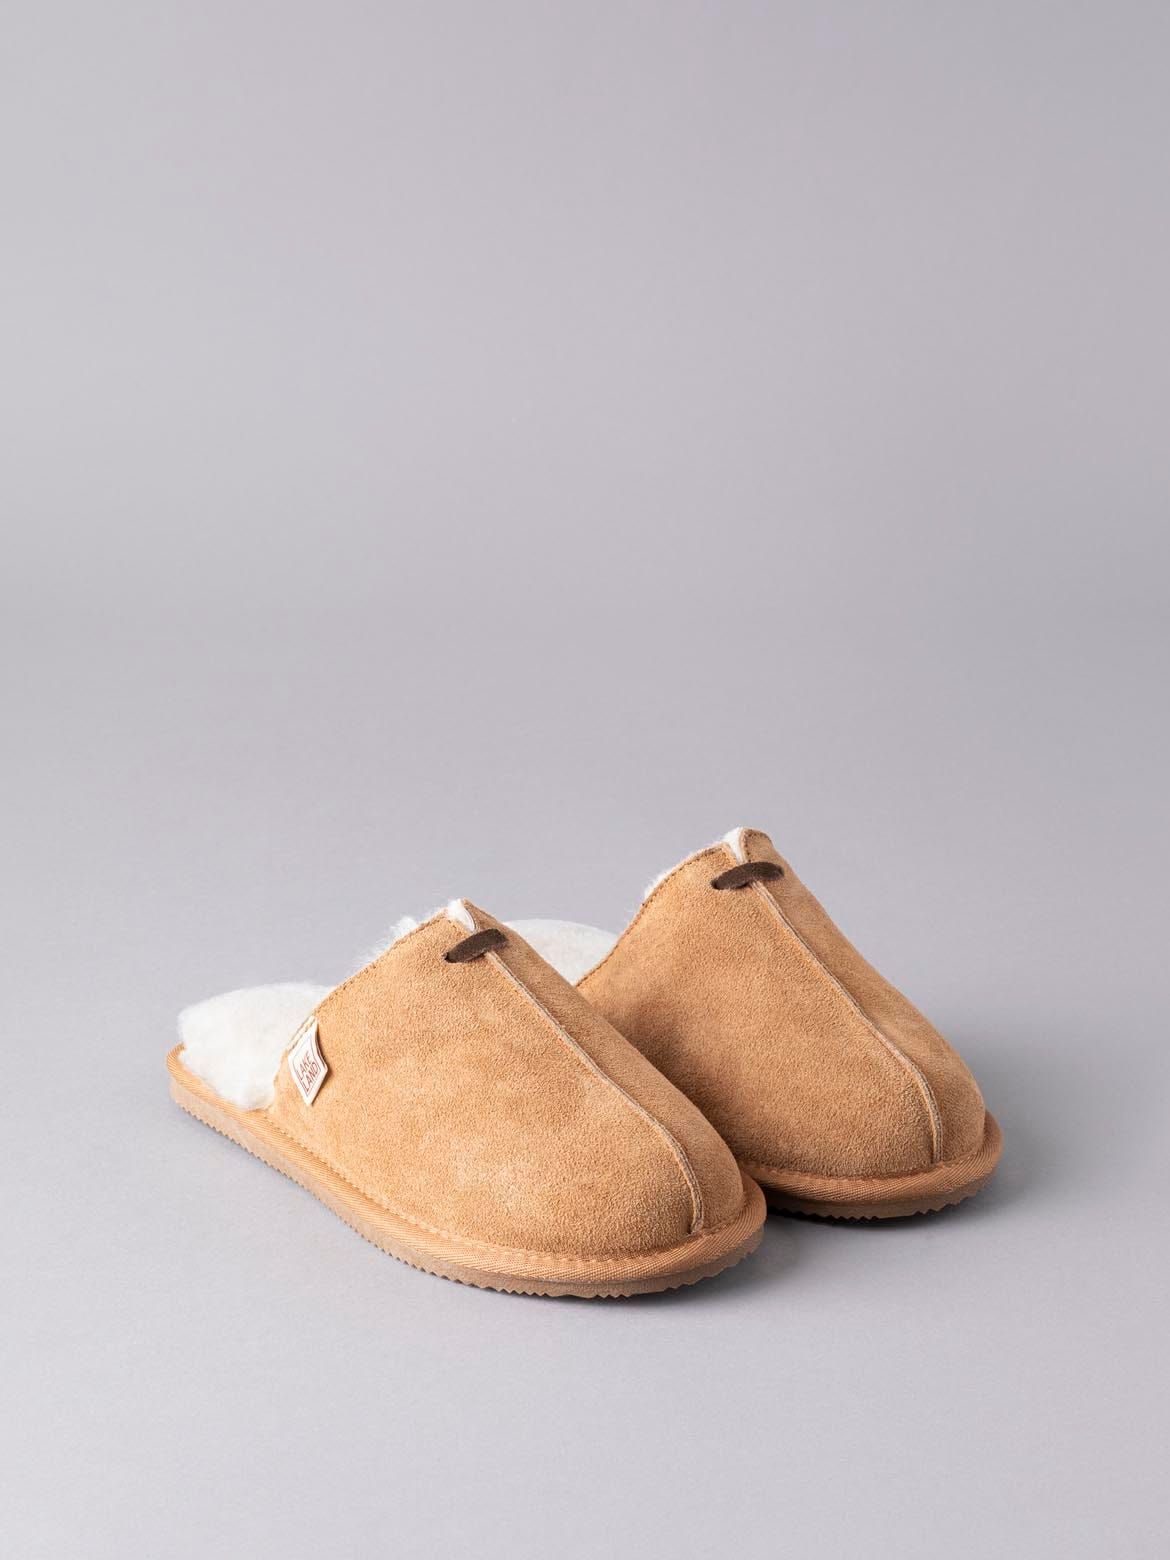 Our traditional slider slippers have had a little upgrade (well, quite a few upgrades!). Hand-crafted in sumptuously soft 100% sheepskin, the sueded, velvet-like exterior has a distinctive front seam and contrasting leather tab. Inside, they are a treat for your feet (we couldn't resist), not only is the soft wool a fabulous insulator and thermal regulator, but our new insole features air-pockets to provide the ultimate cushioned feel. The natural fluffiness of the sheepskin will make your slippers feel slightly small at first but this will soon mould comfortably to your foot. If the length feels fine, you have the right size. If you can feel your toe is touching the front of the slipper, it is too small, you'll need to size up. We recommend you size up if you are between sizes.